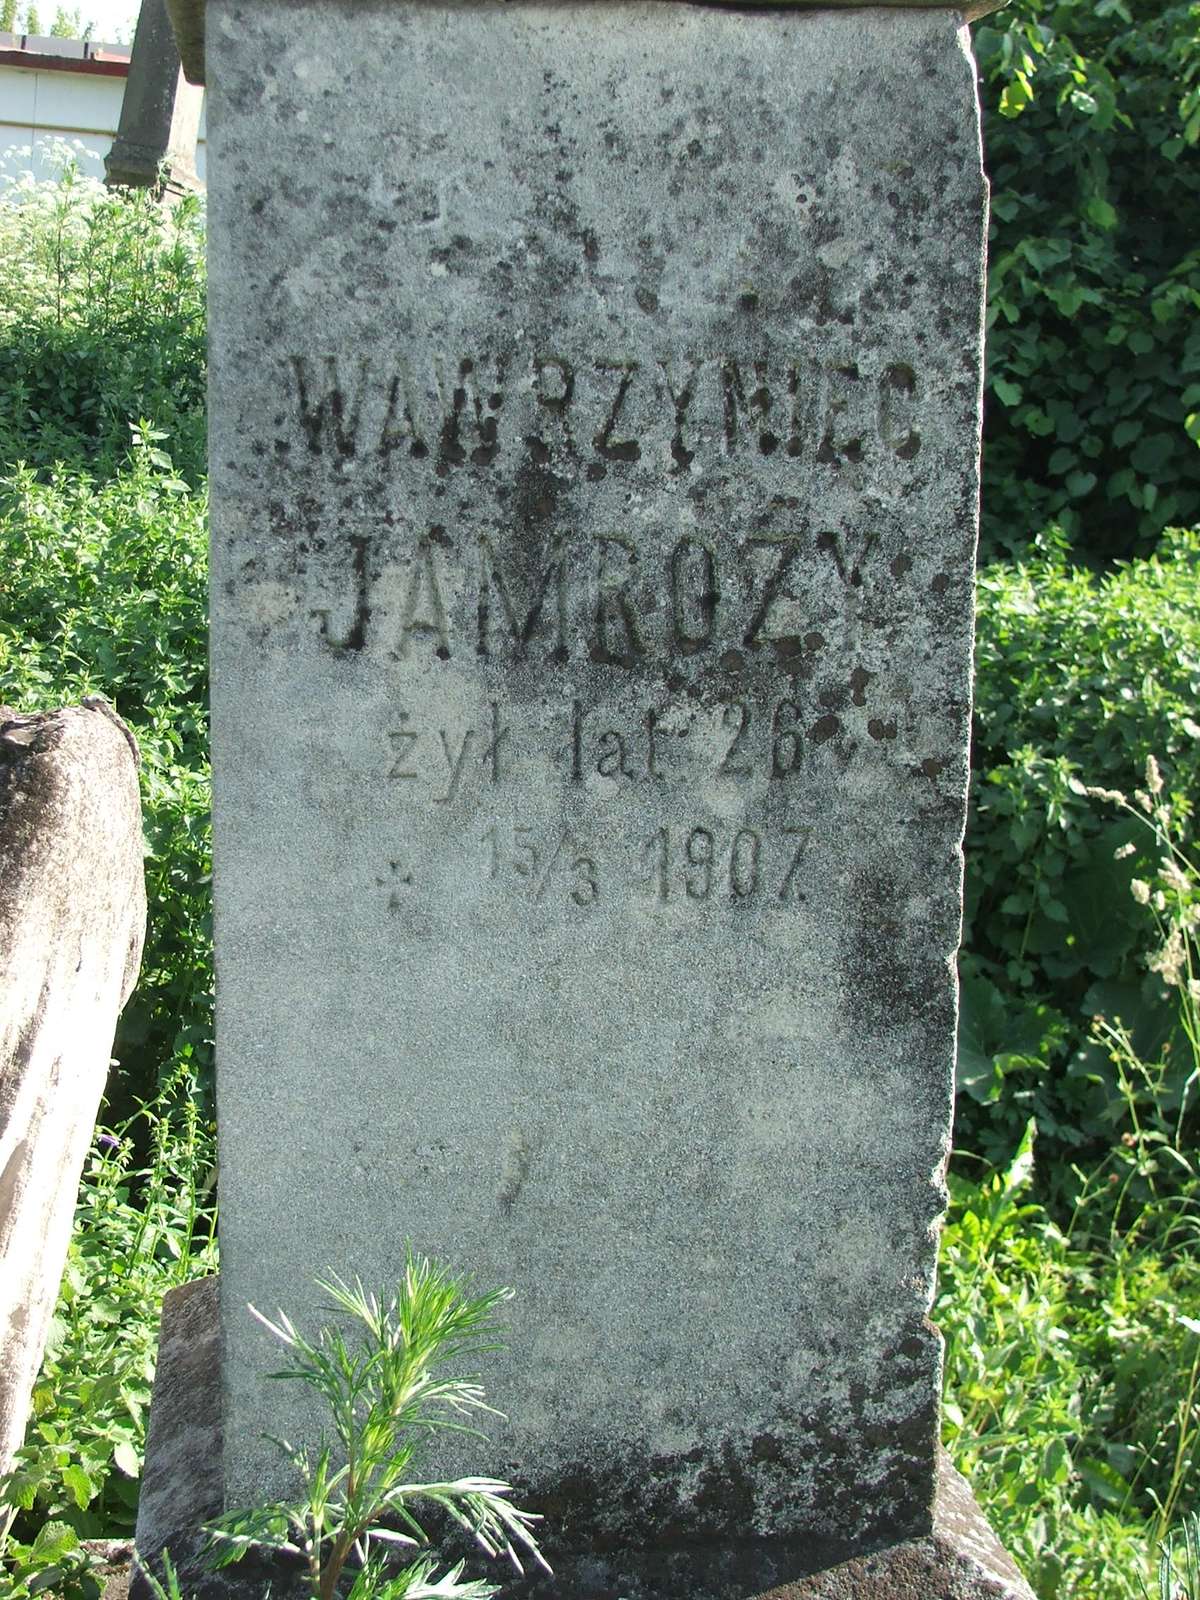 Fragment of the tombstone of Nicholas and Lawrence Jamoza, Zbarazh cemetery, as of 2018